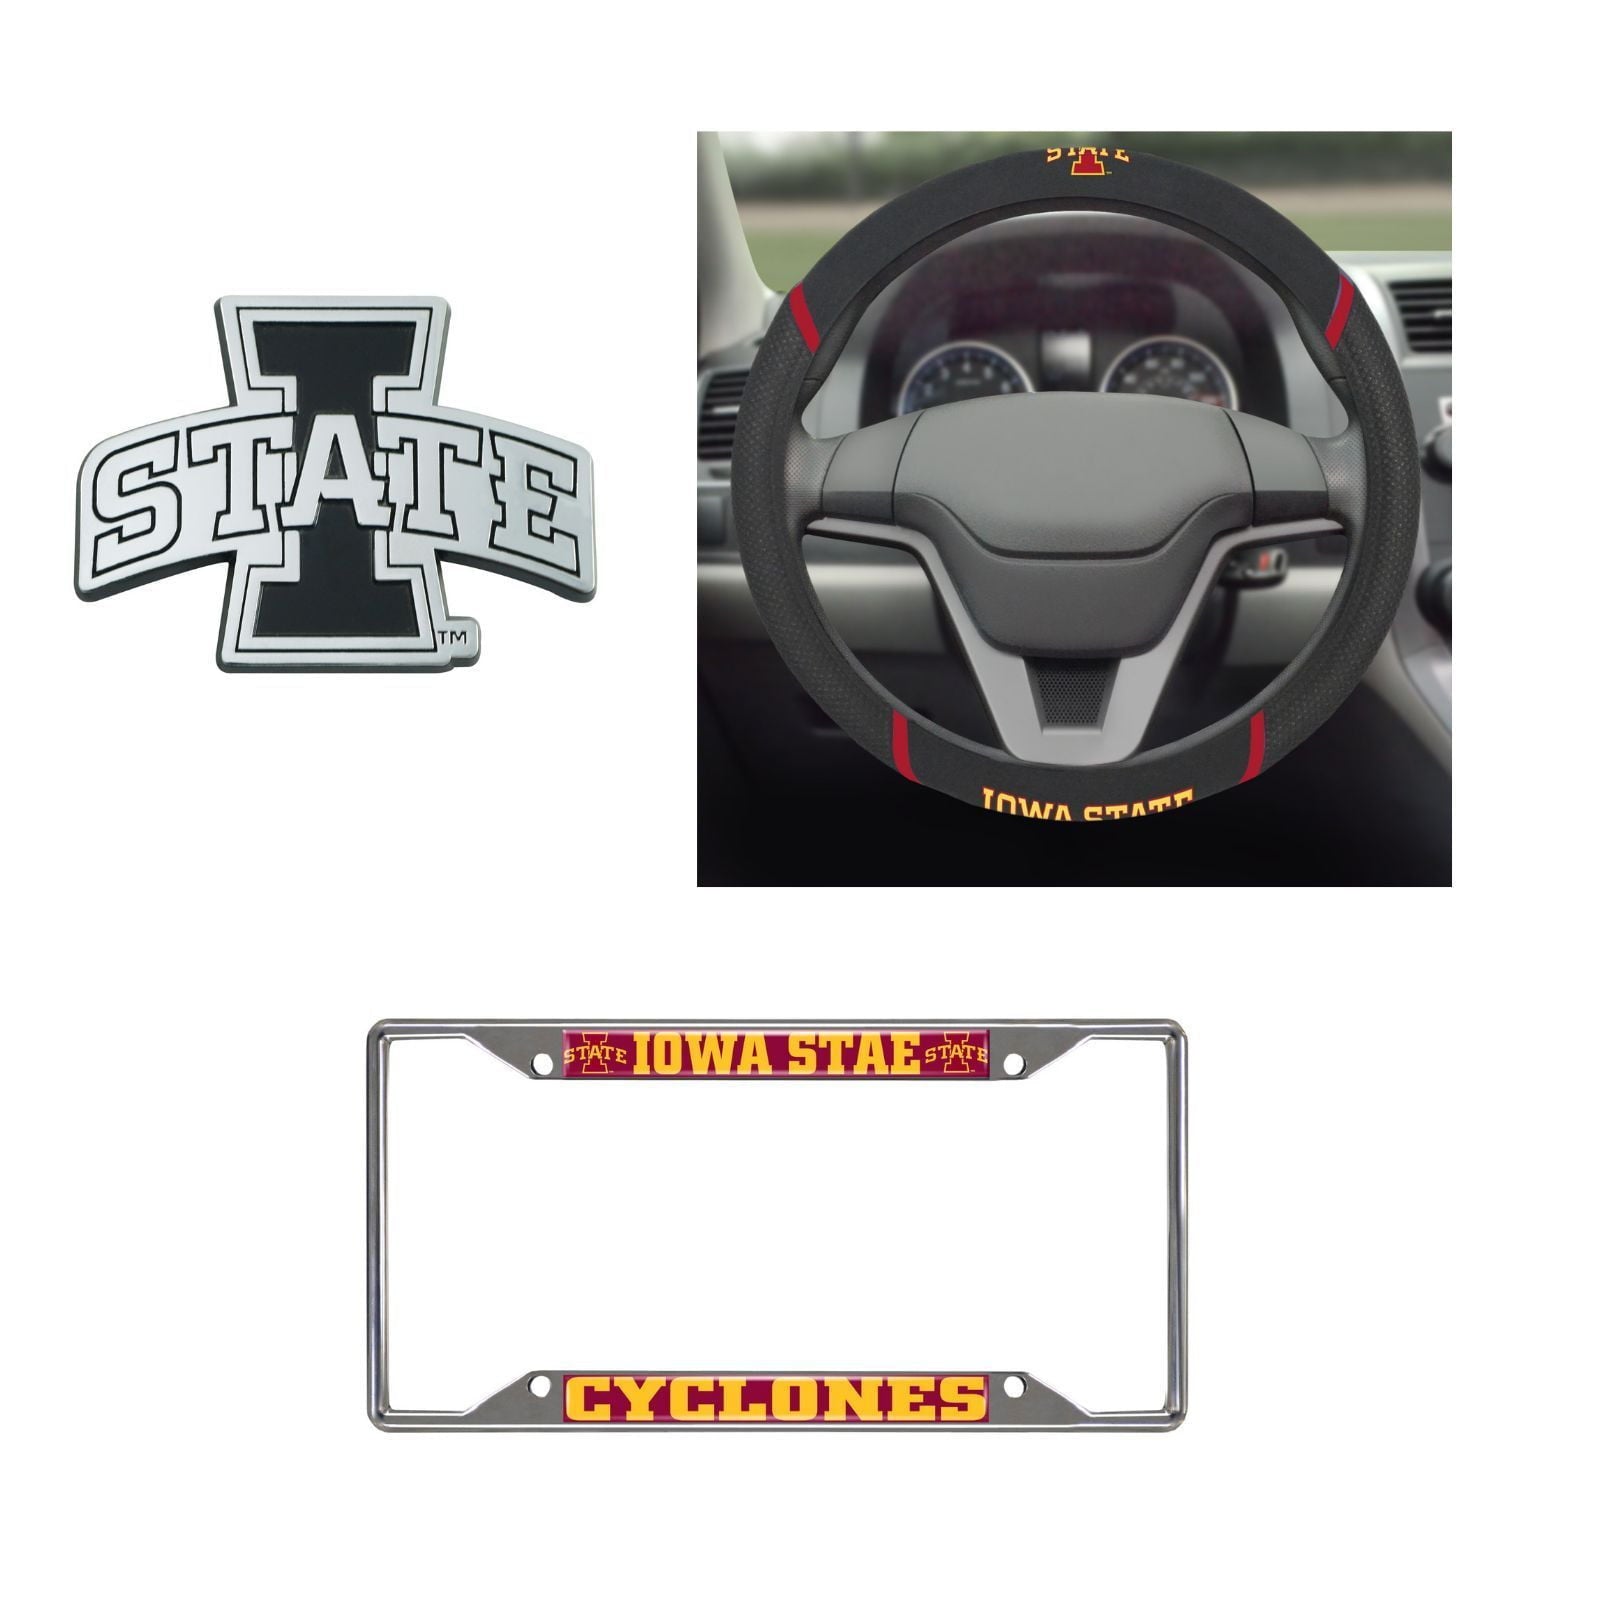 lowa State Cyclones Steering Wheel Cover, License Plate Frame, 3D Chrome Emblem